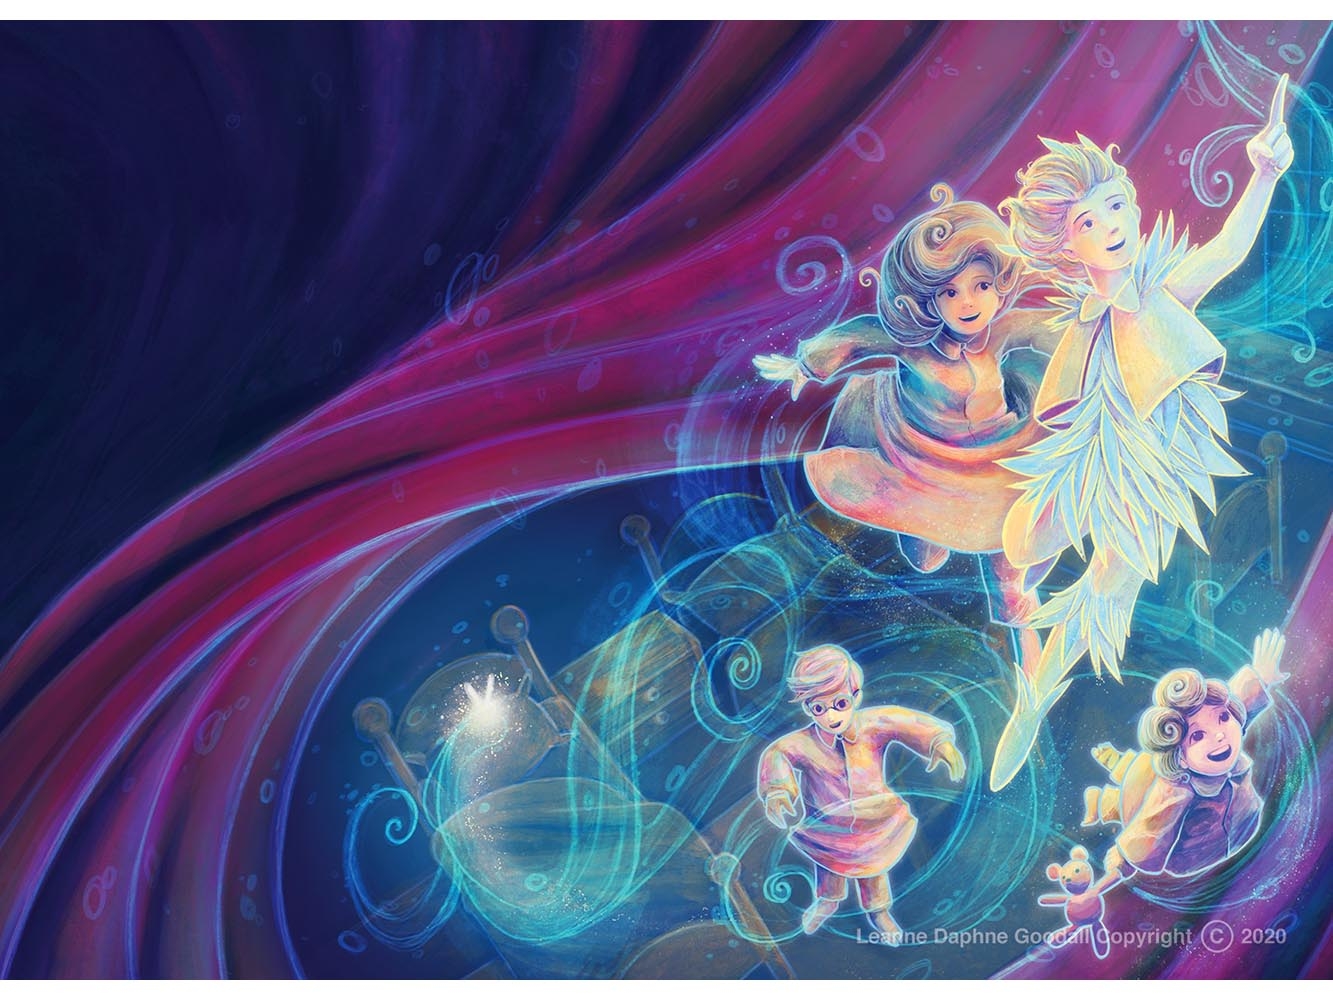 Illustration of Peter Pan flying and pointing to the sky with each of the Darling children, the children's bedroom and swirling pink colours in the background